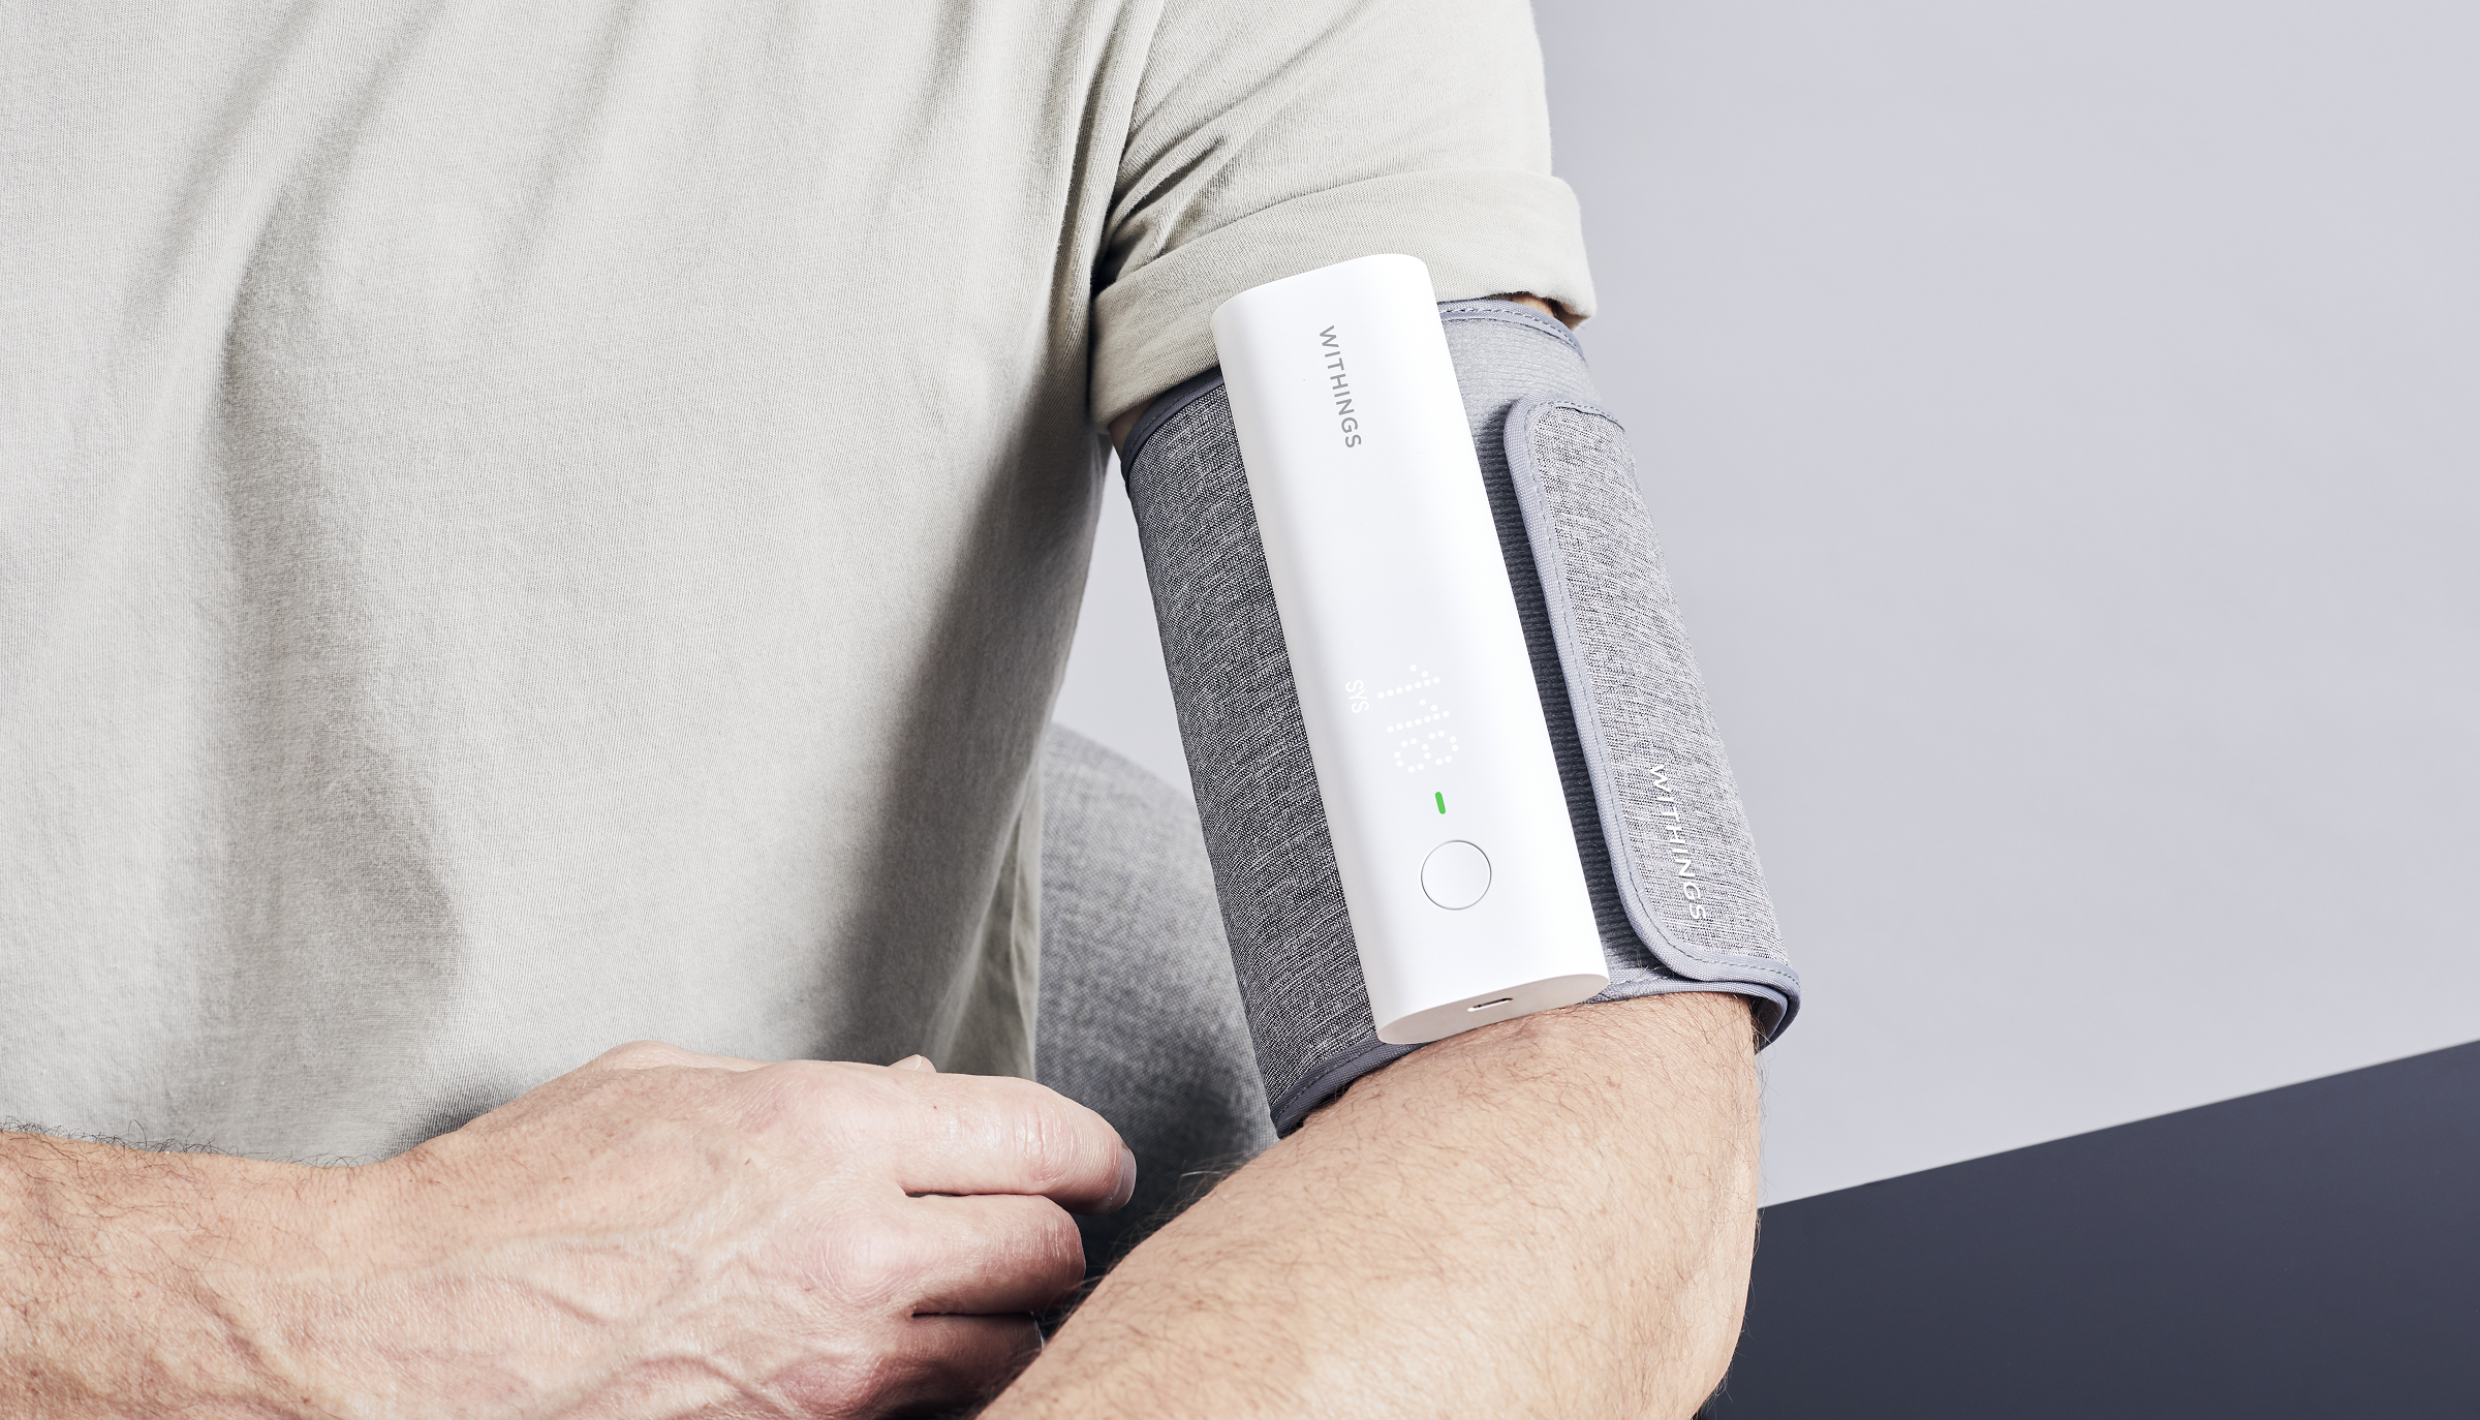 Withings offers blood pressure monitor for iPhone